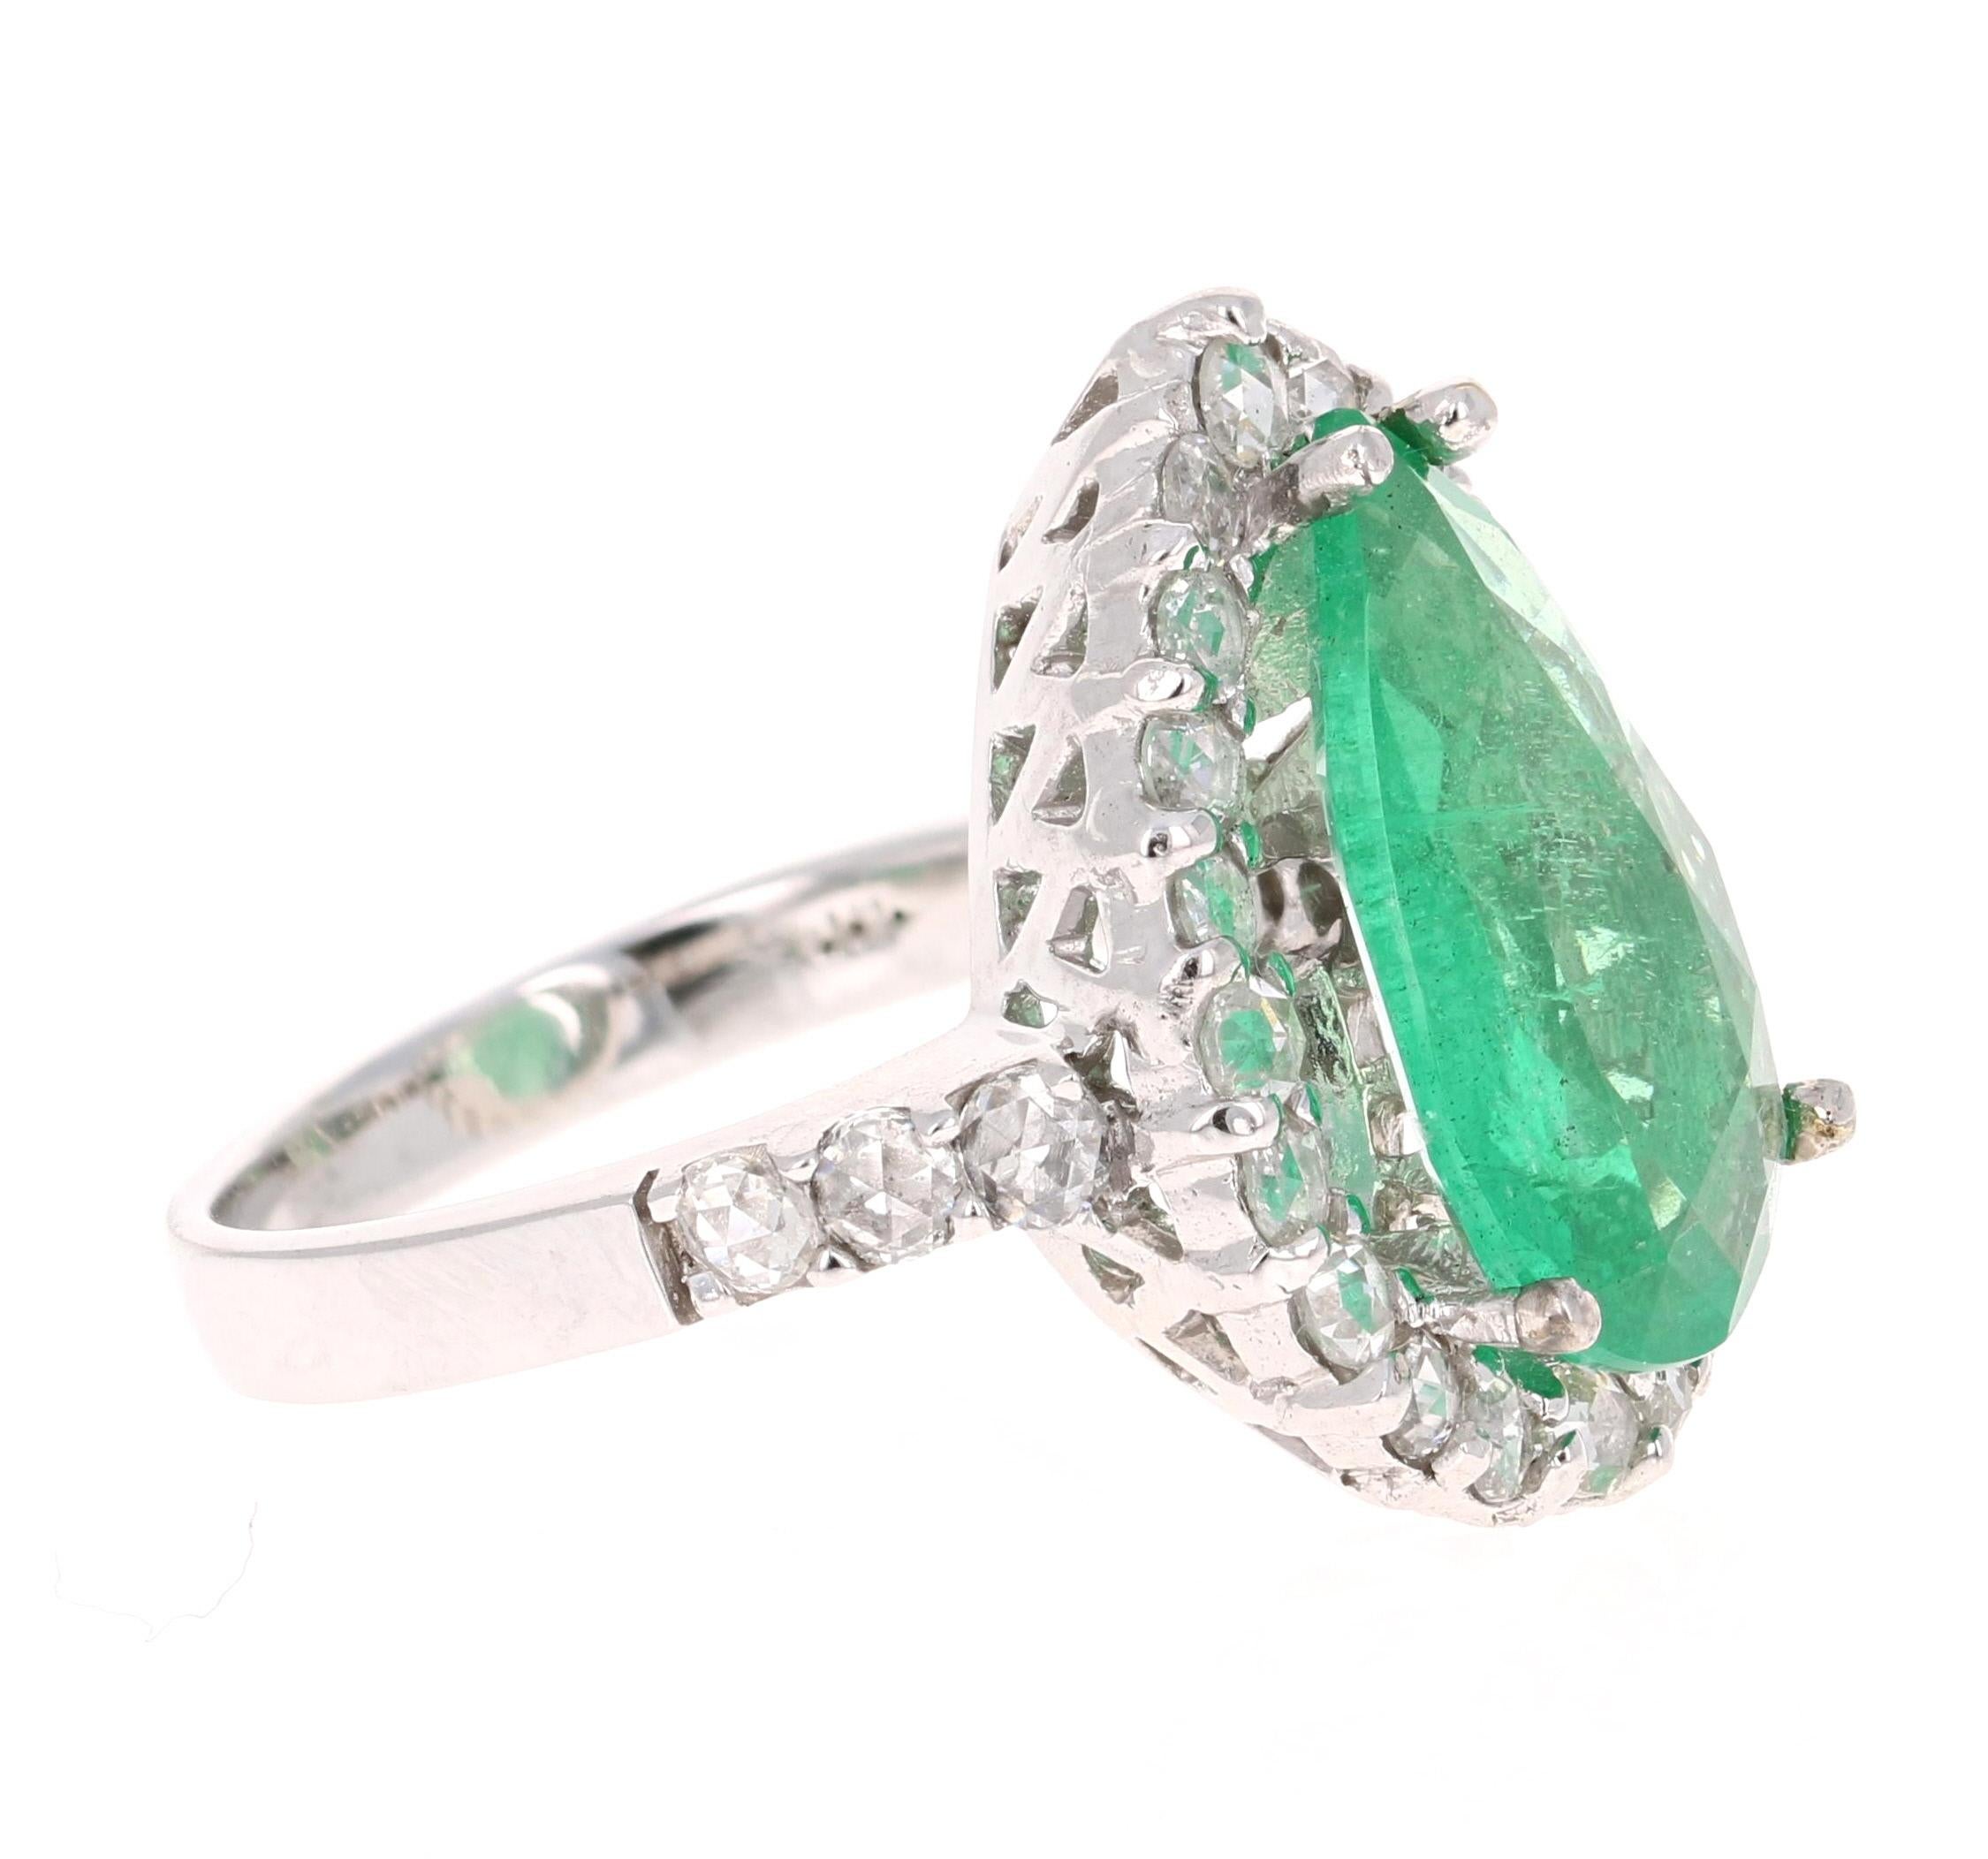 This is a gorgeous, gorgeous, gorgeous Emerald and Diamond Ring! This 14K White Gold Ring has a stunning  Pear Cut Emerald that weighs 4.51 carats. It has 28 Rose Cut Diamonds that weigh 1.16 carats. The total carat weight of this ring is 5.67